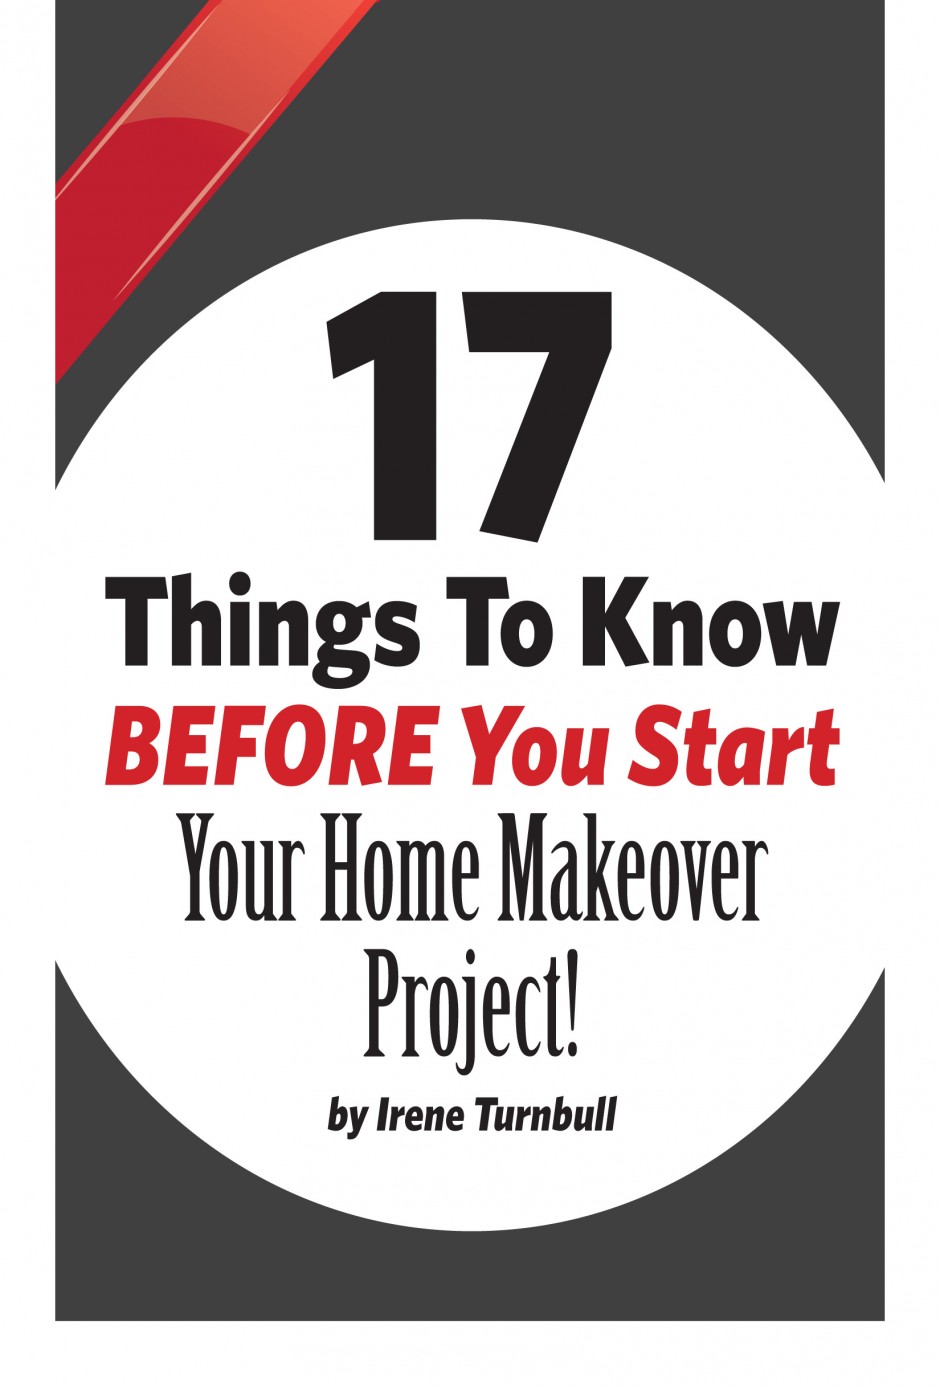 17 Things To Know Before You Start Your Home Makeover Project